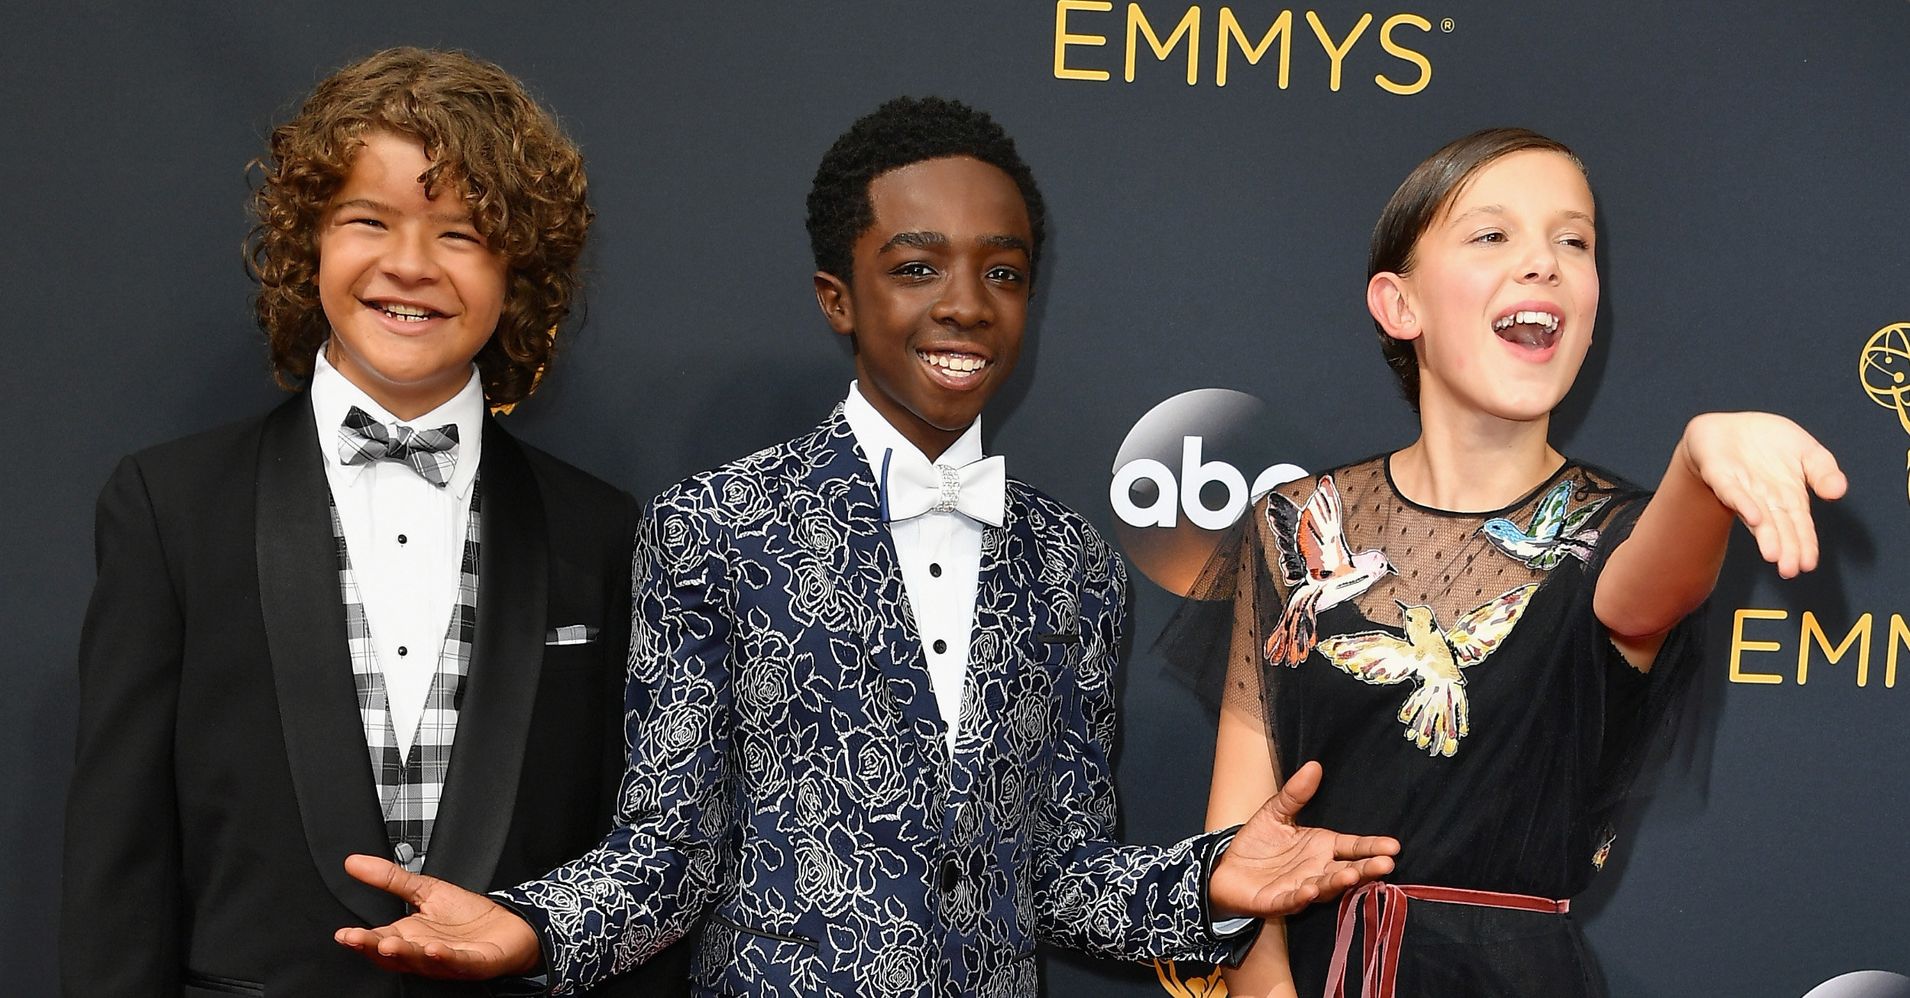 The 'Stranger Things' Kids Won The Emmys Before They Even Started